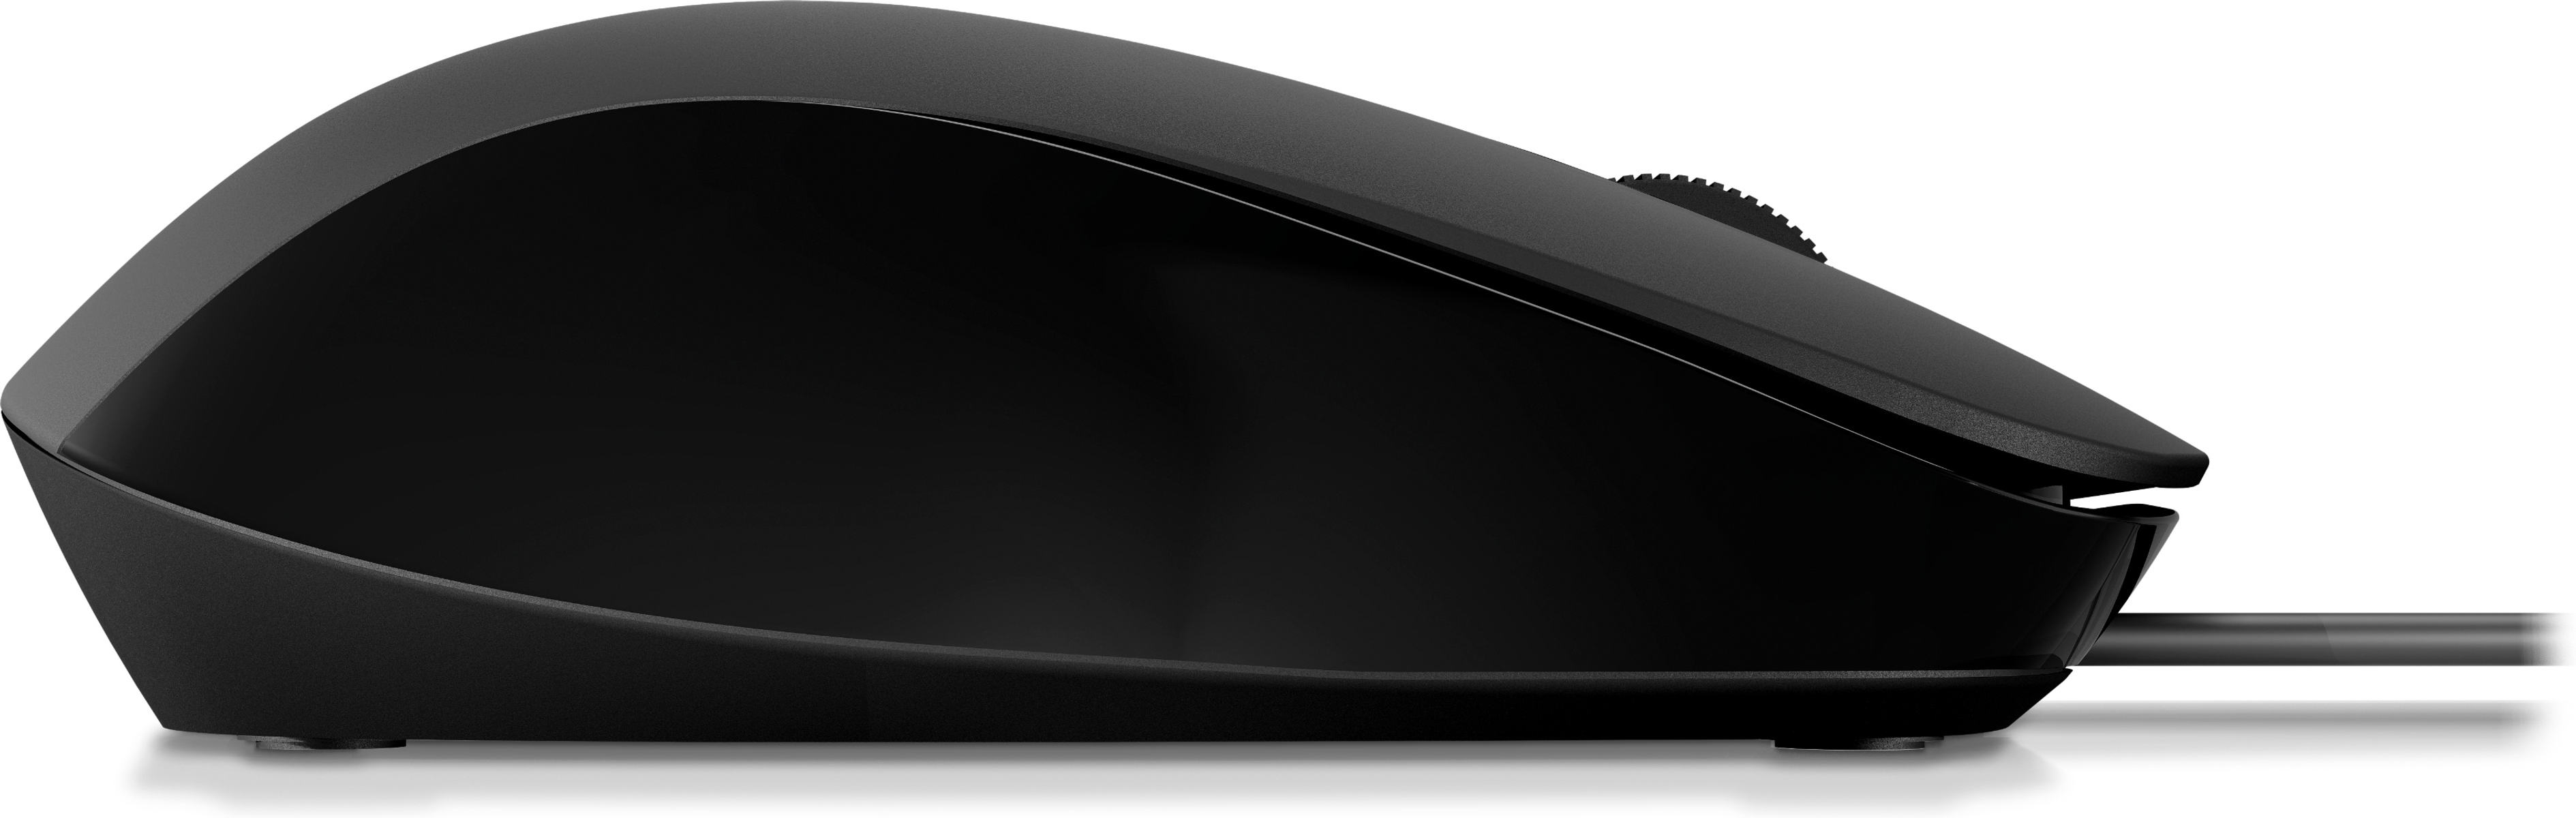 Mouse 150 HP Maus, Wired Schwarz